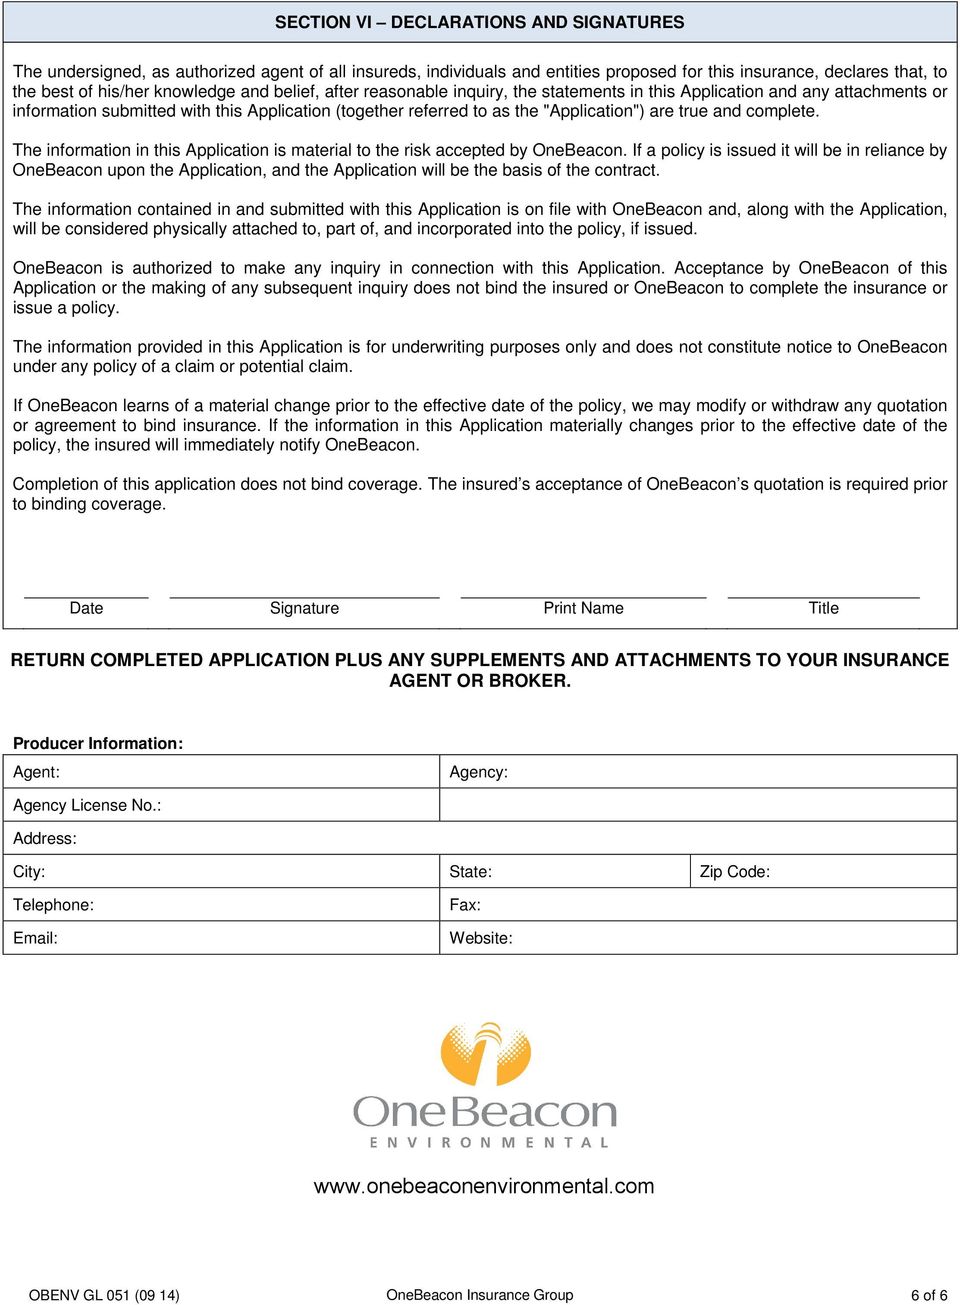 complete. The information in this Application is material to the risk accepted by OneBeacon.